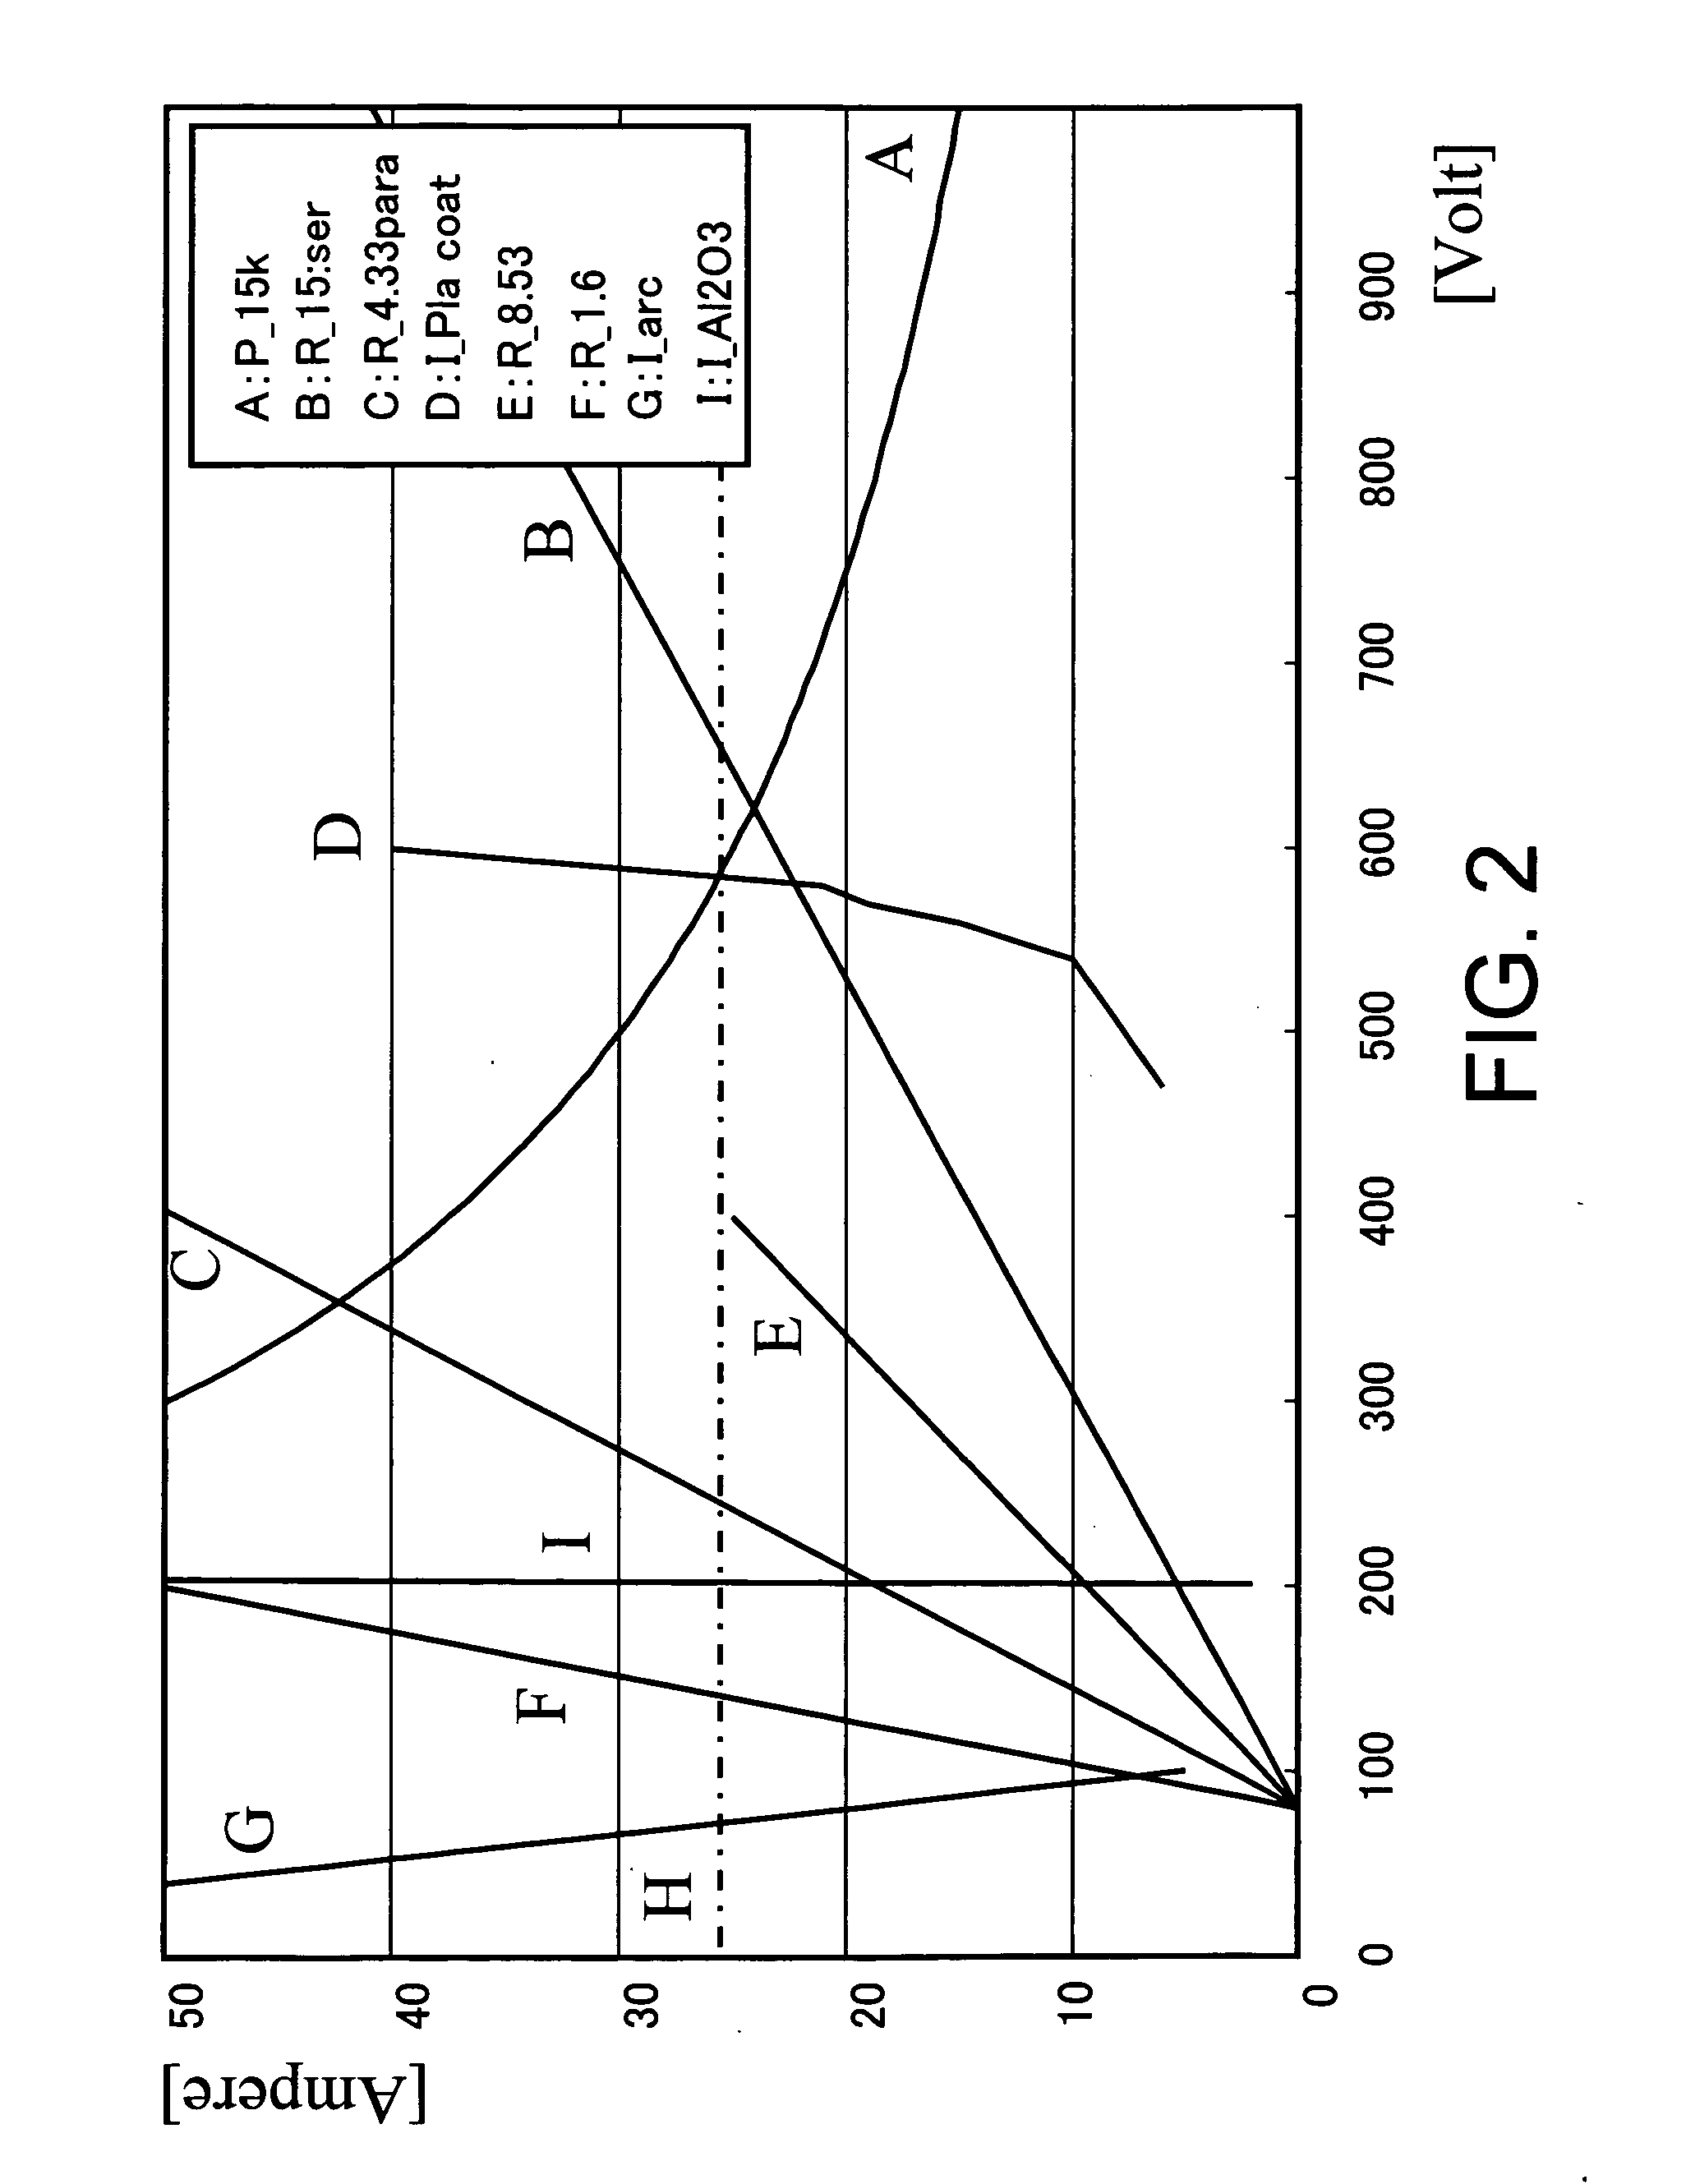 Discharging power source, sputtering power source, and sputtering device